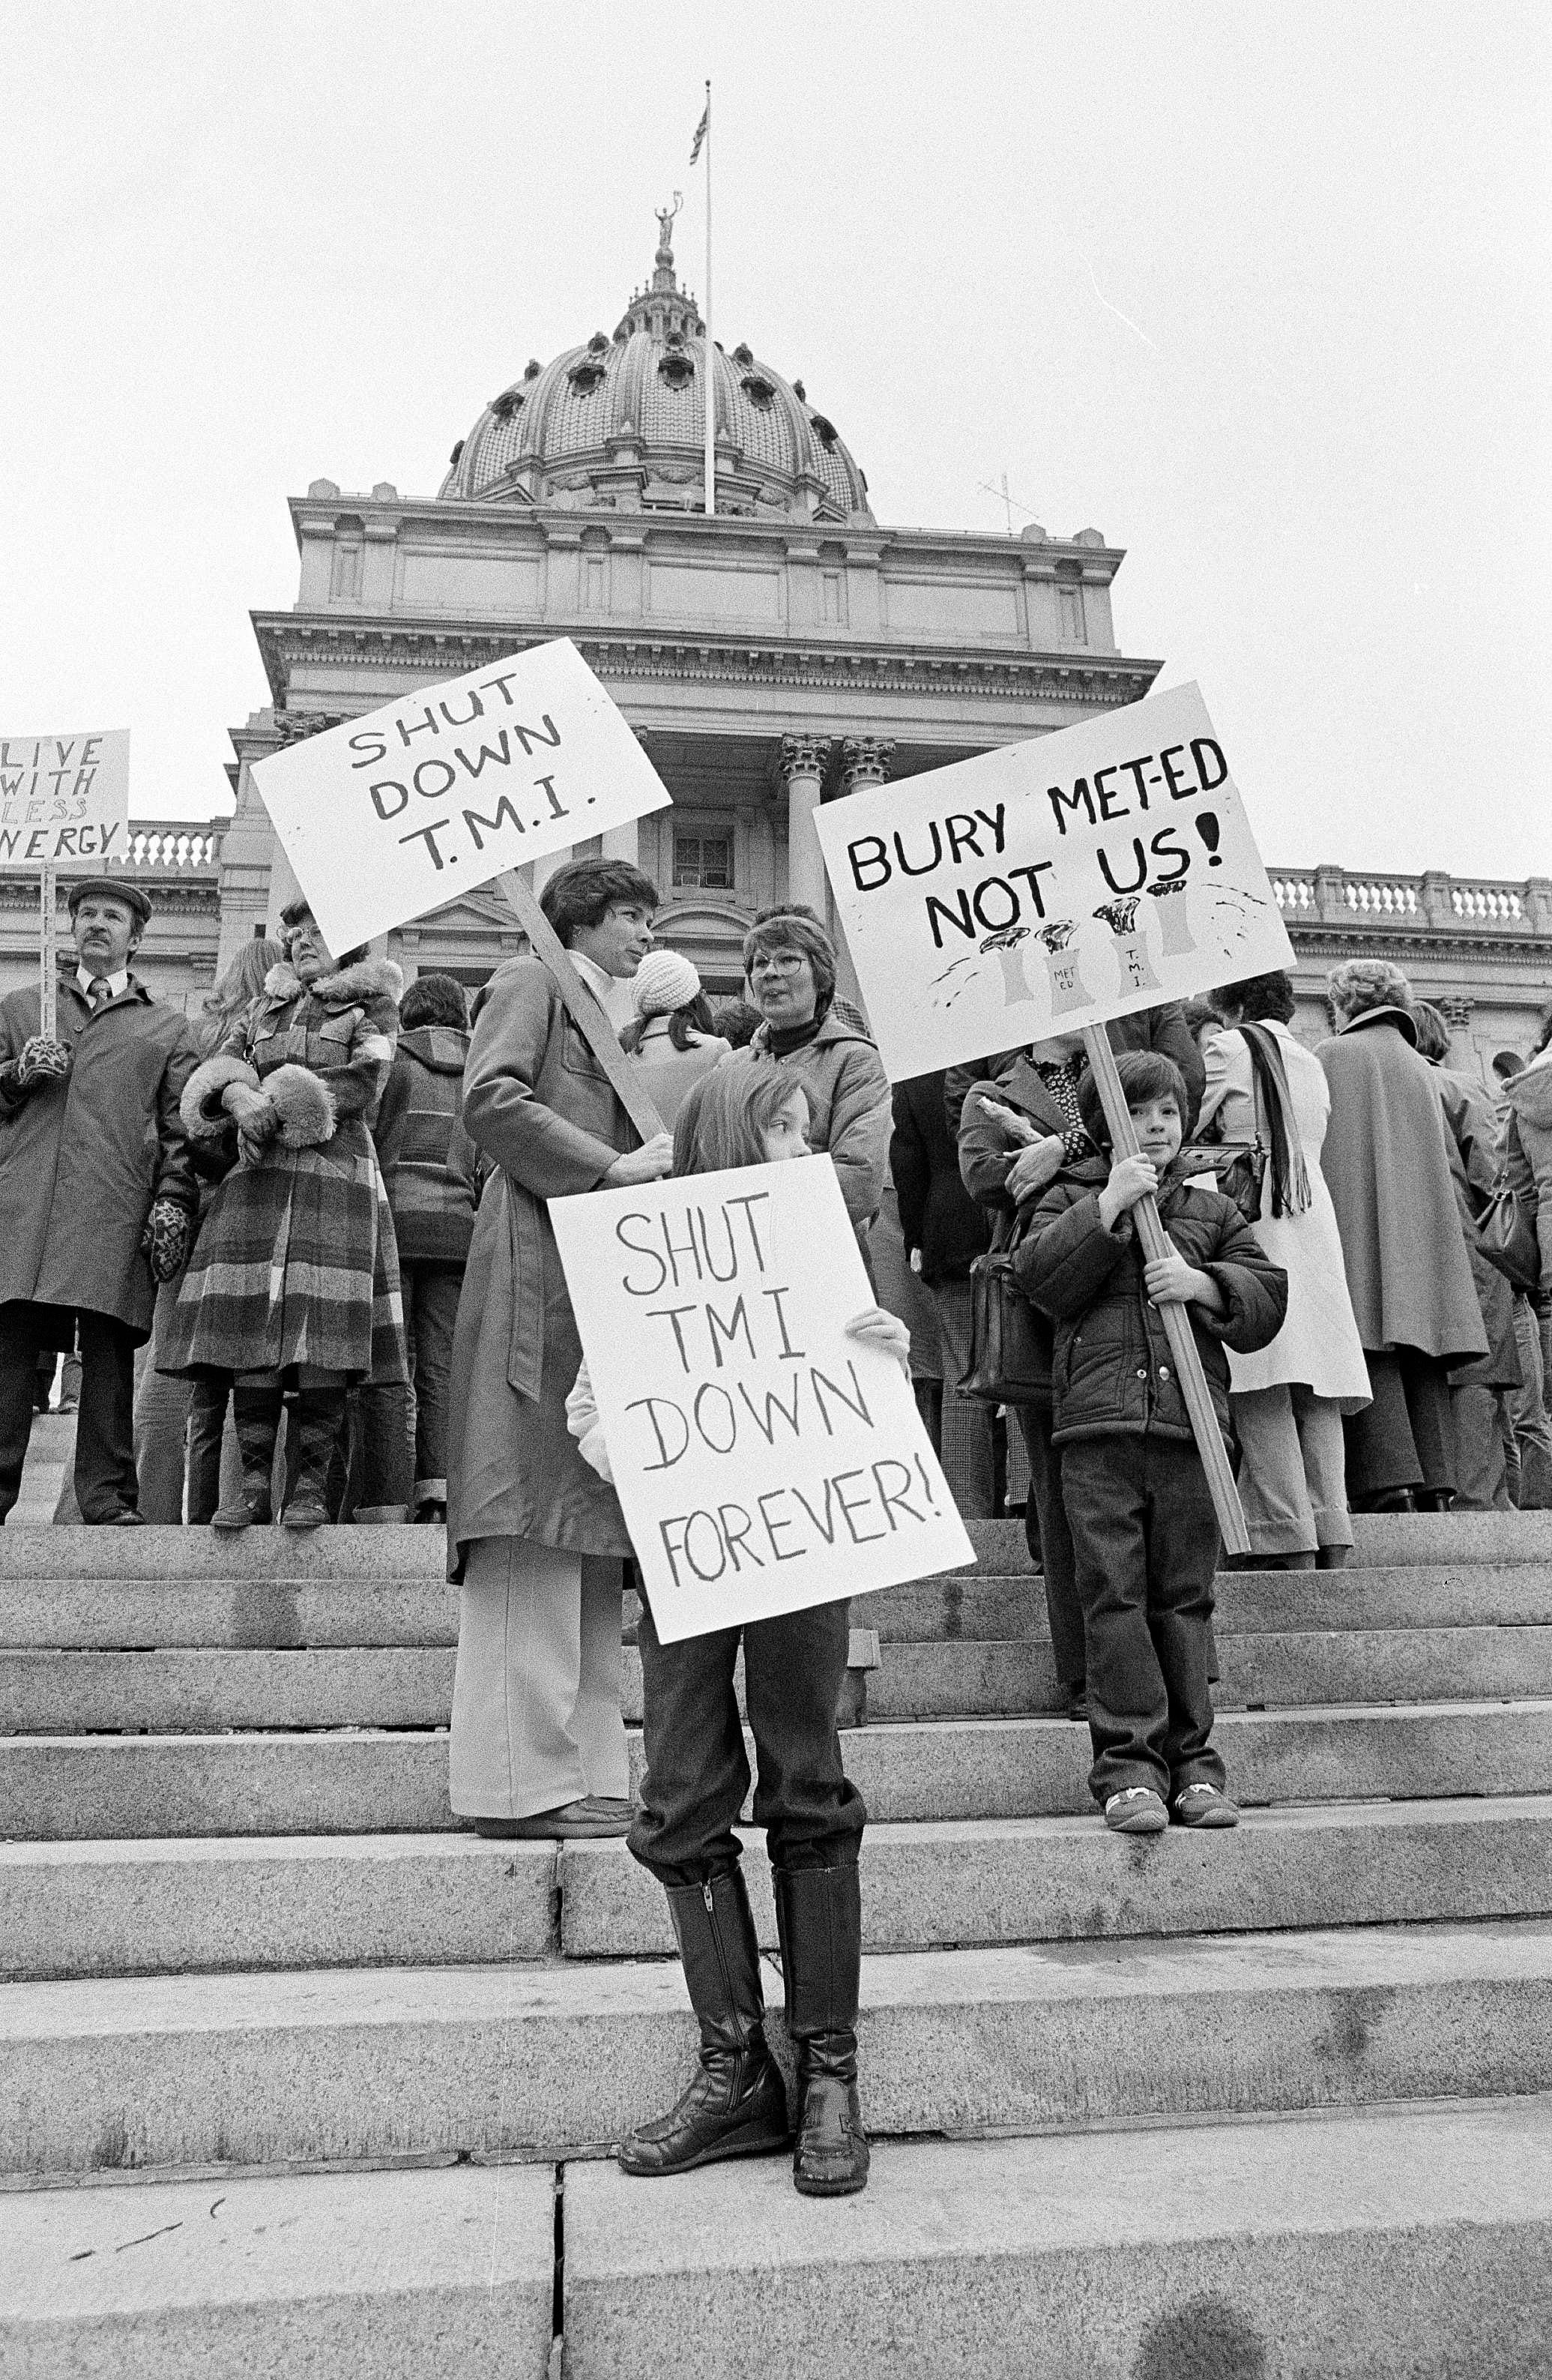 Two mothers along with their children carry signs in front of the State Capitol in Harrisburg, Penn., joining other anti-nuclear power plant demonstrators urging the shut-down of Three Mile Island (TMI) nuclear power plant near Harrisburg, April 8, 1979. The plant had an accident causing radiation to leak into the atmosphere. (AP Photo/Paul Vathis)